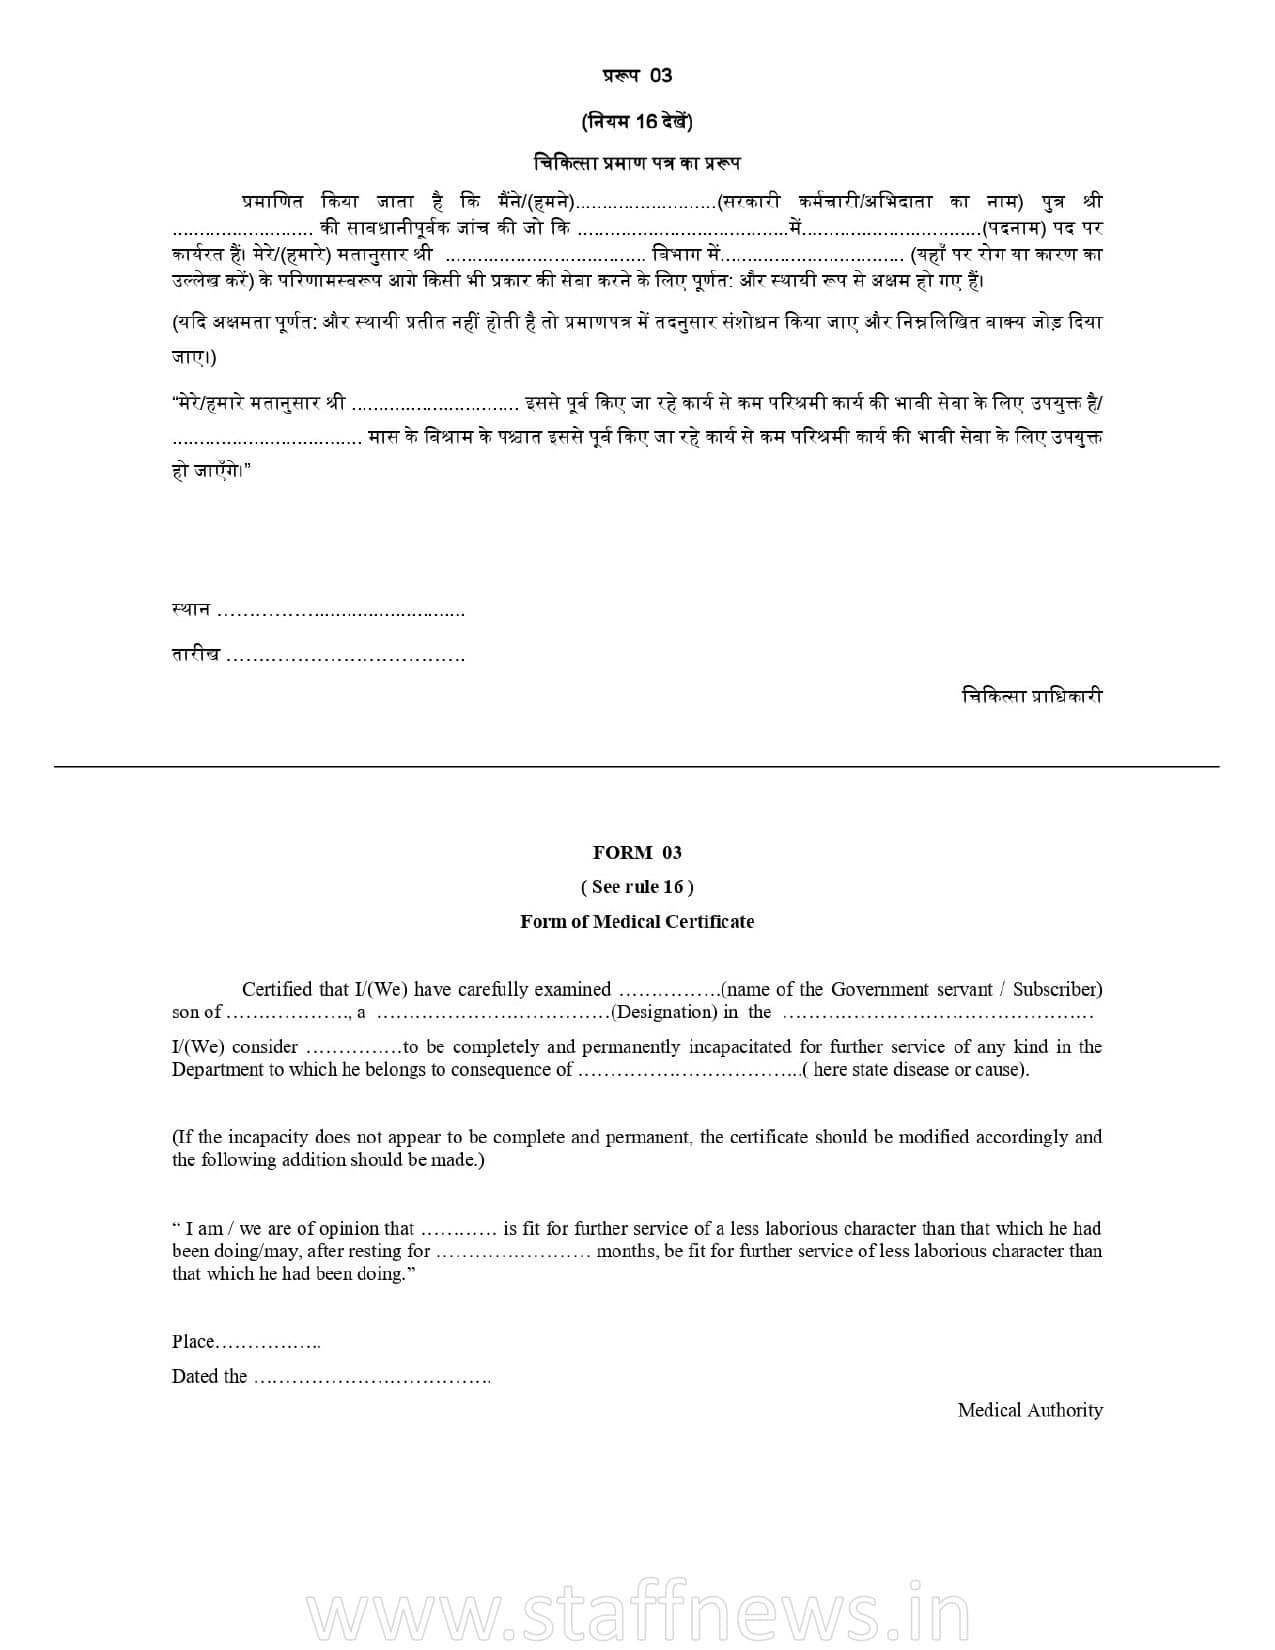 Form 03 – Form of Medical Certificate under CCS (NPS) Rules, 2021